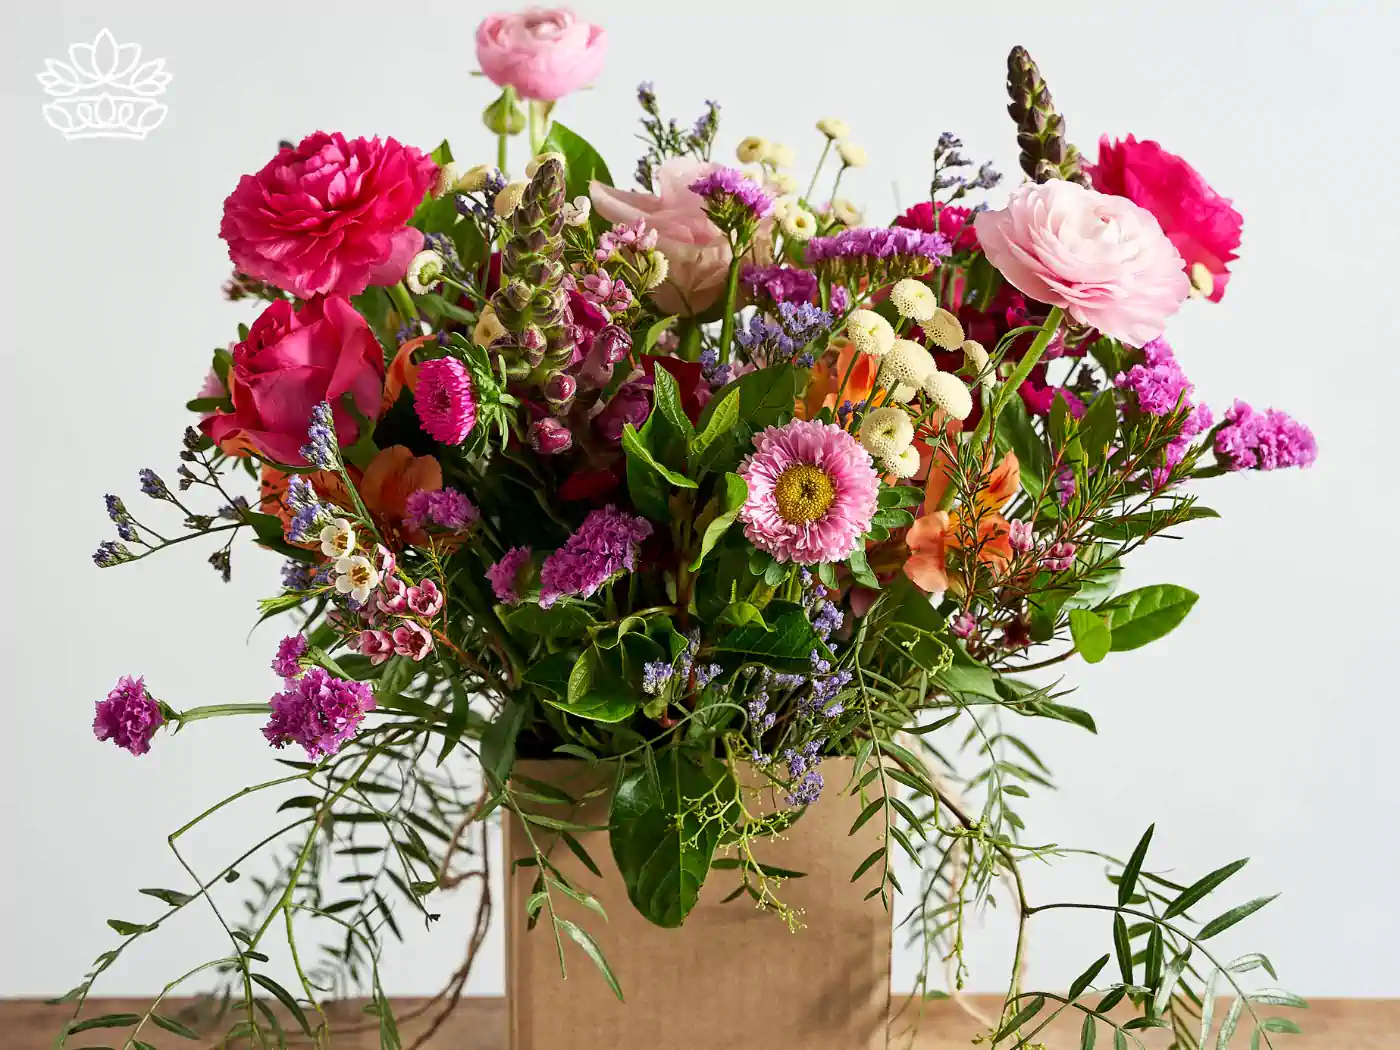 Exquisite bouquet of Secretary's Day flowers including vibrant pink roses, deep red carnations, delicate lavender, and an array of green foliage, all beautifully arranged in a rustic brown paper bag. 